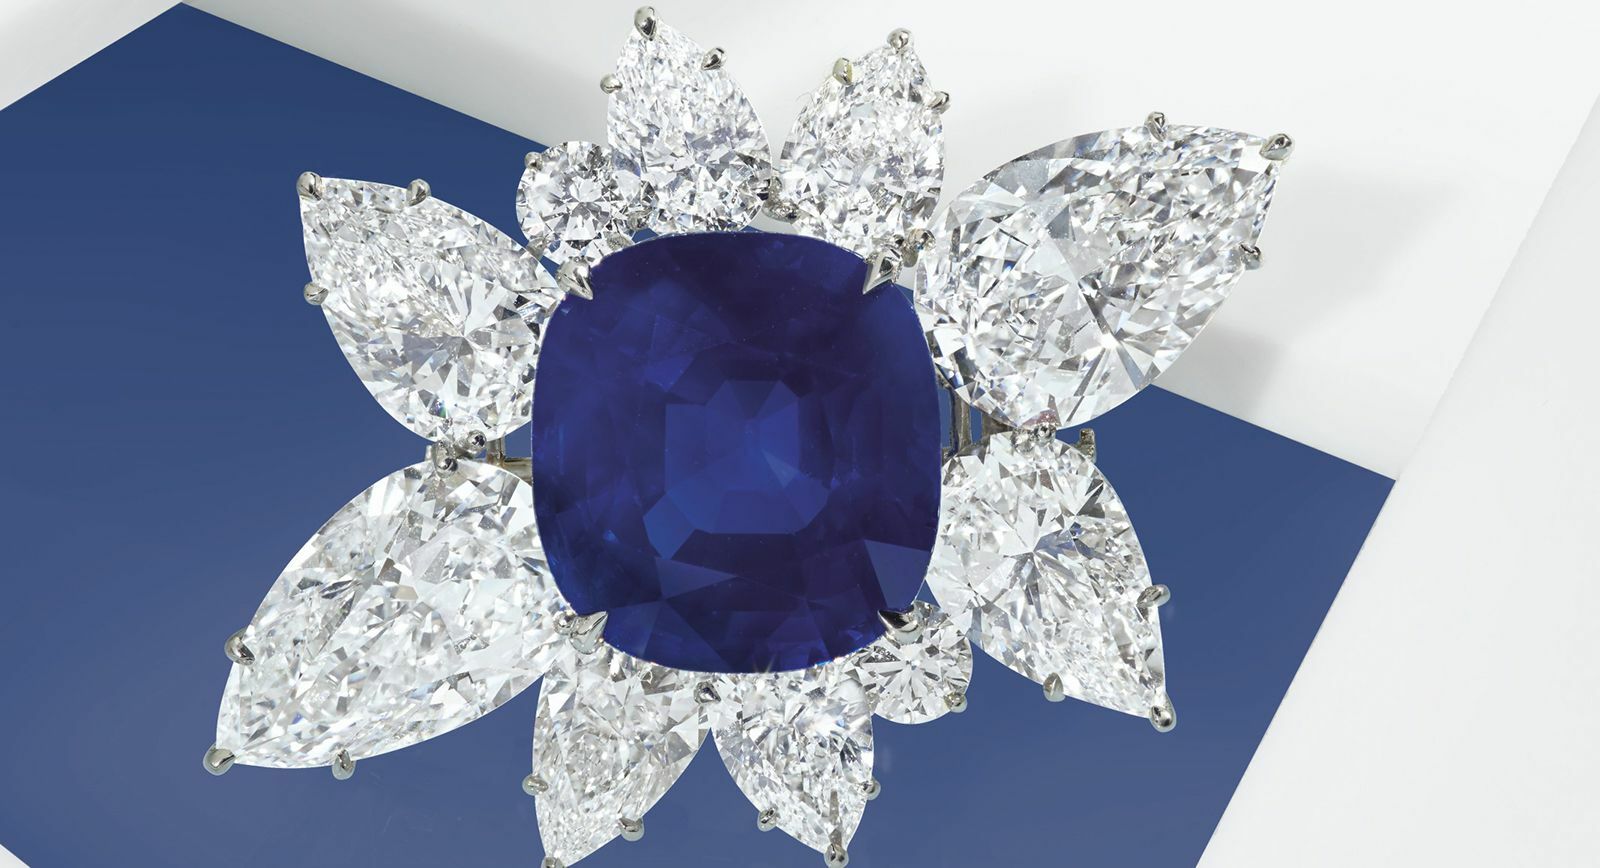 Kashmir Sapphire cushion-cut of 43.10 carats with pear-shaped diamonds sold by Christie's as part of a bracelet in 2020